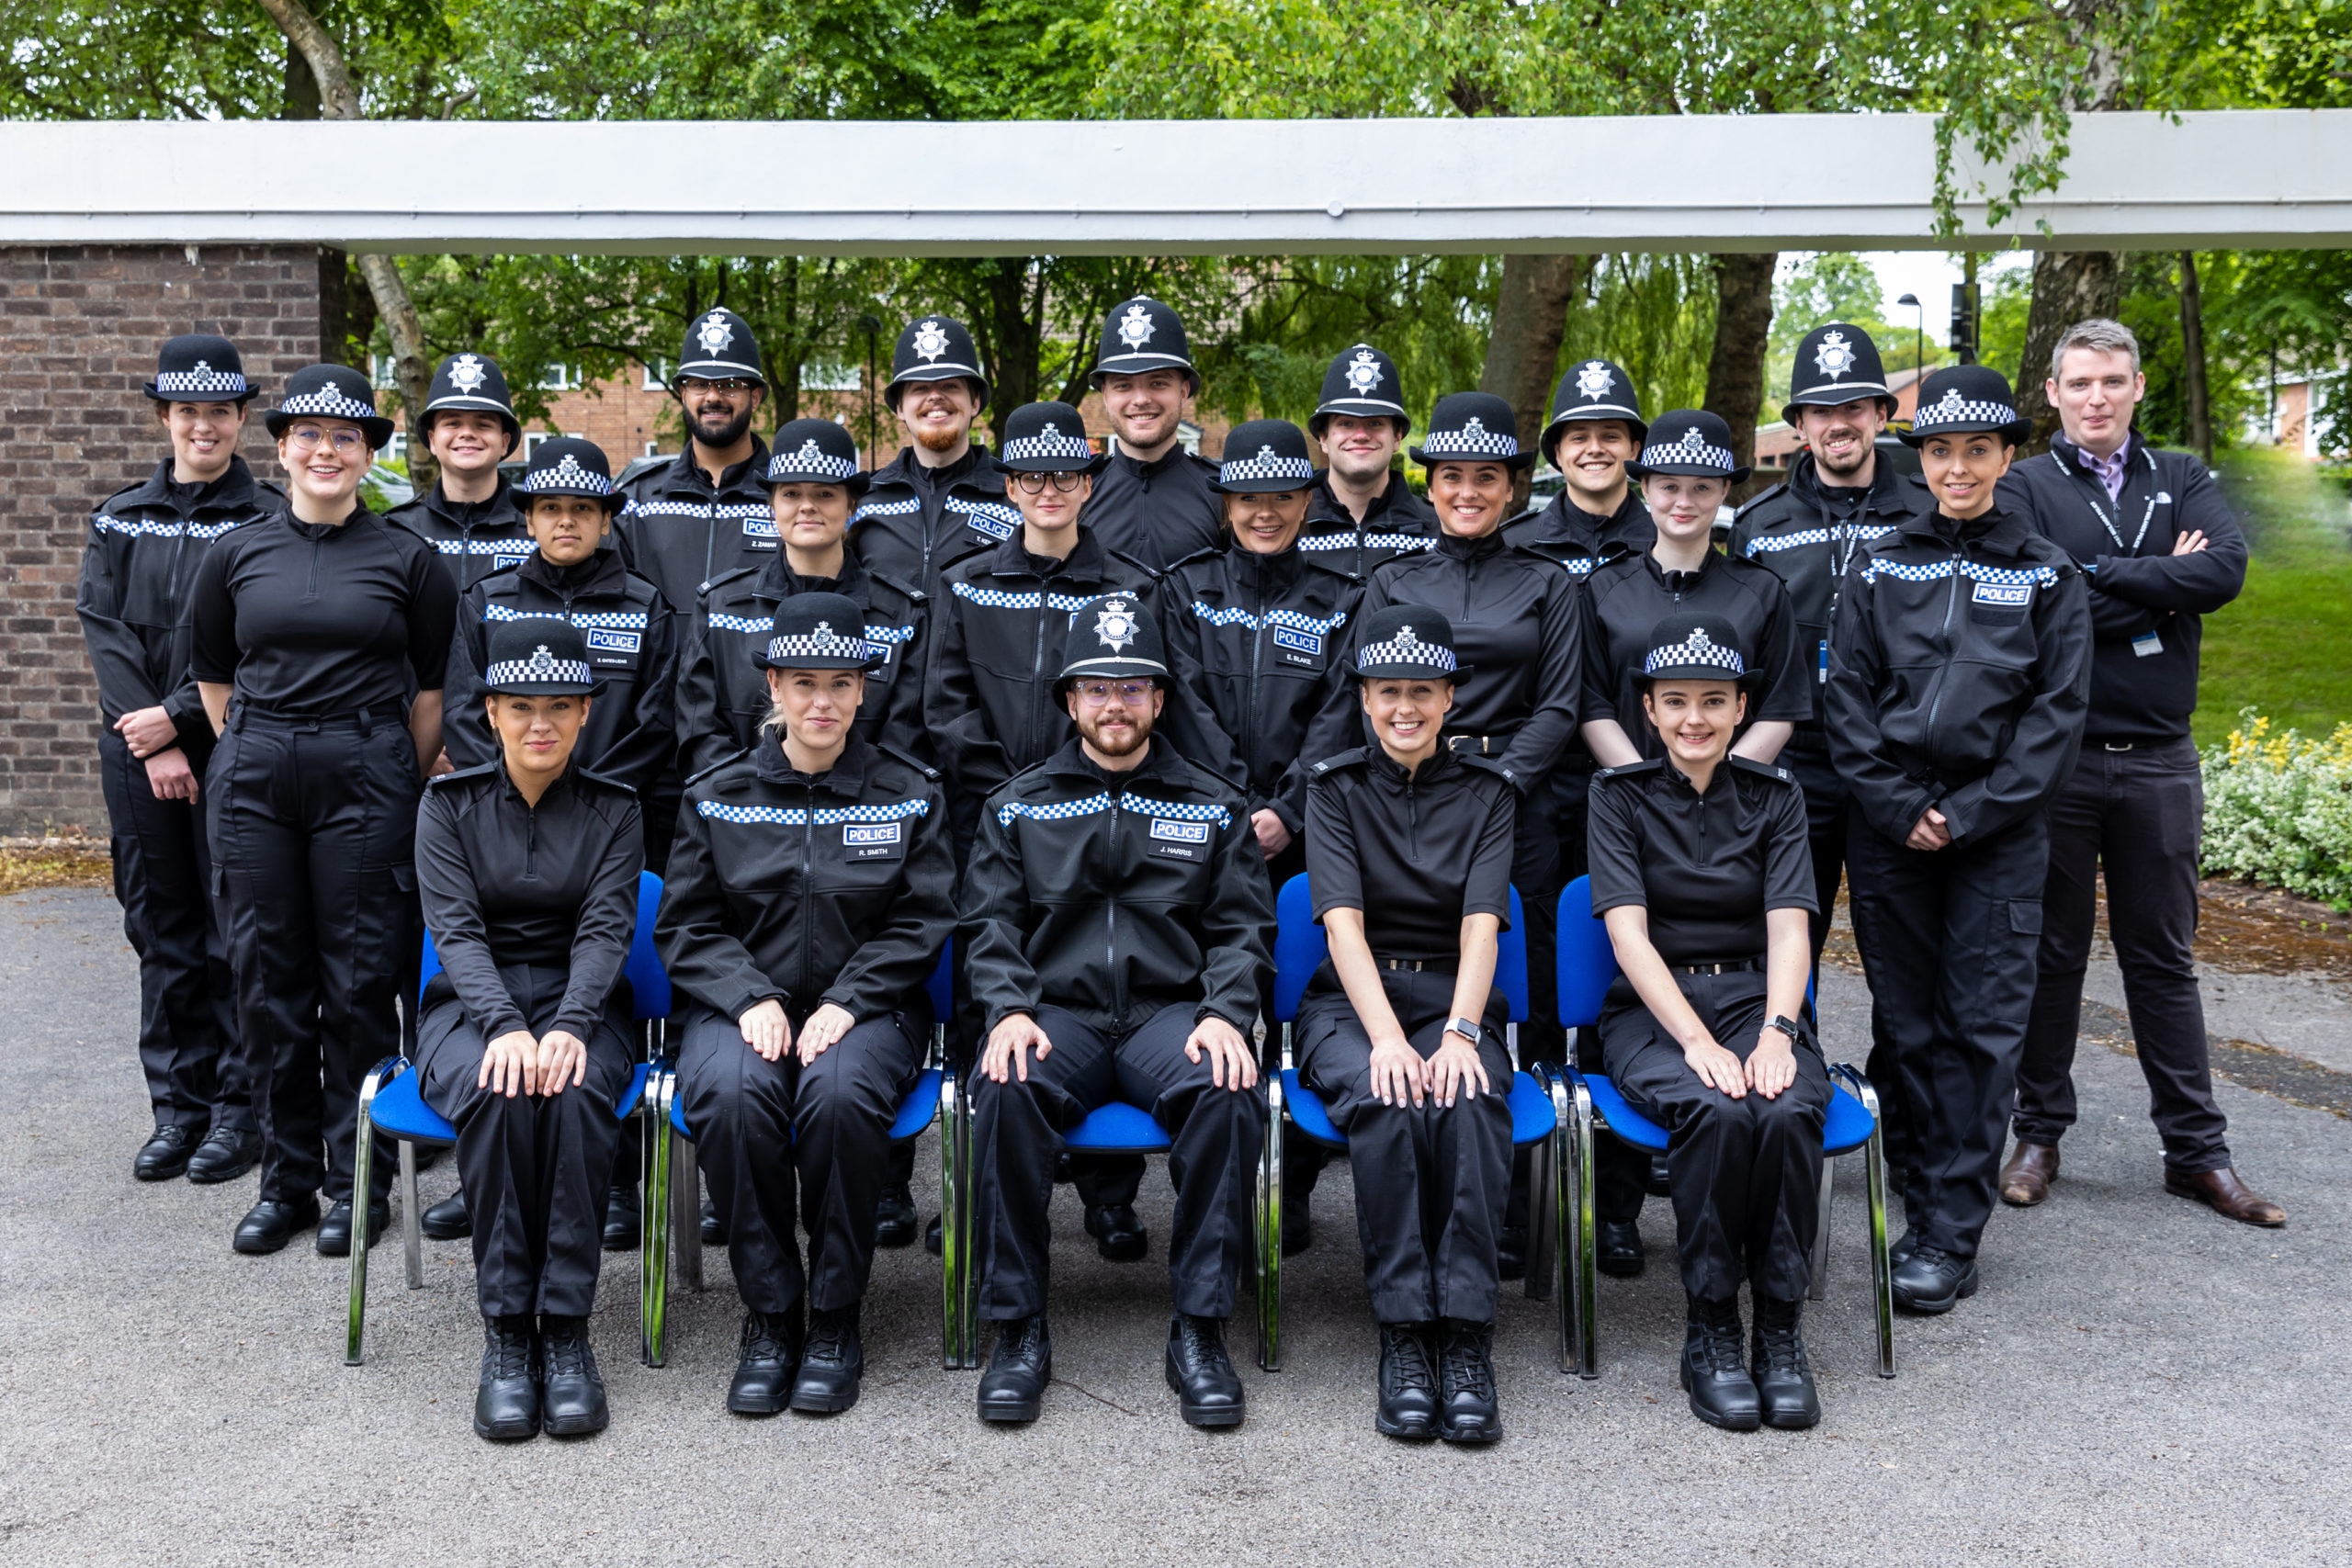 Police Now detectives joining West Midlands Police and their academy trainers (2/2)